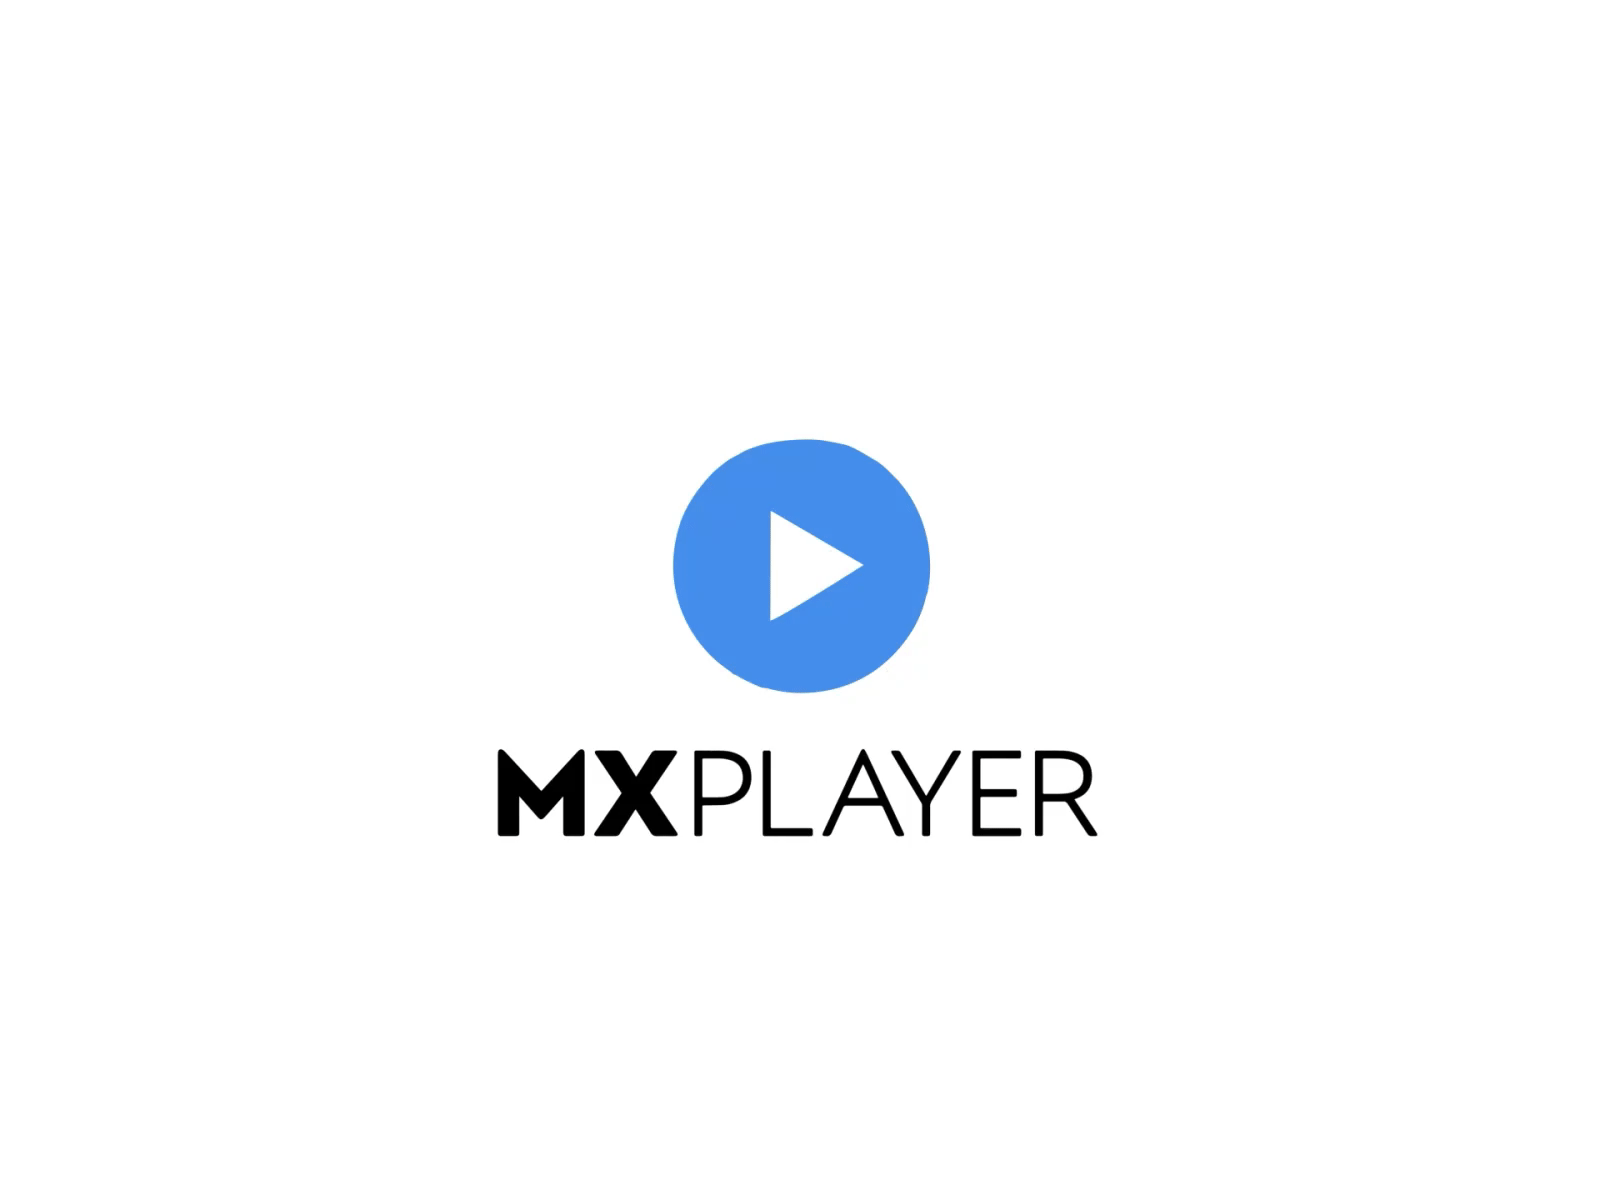 Mx Player Logo Animation By Mehraabi On Dribbble 9578